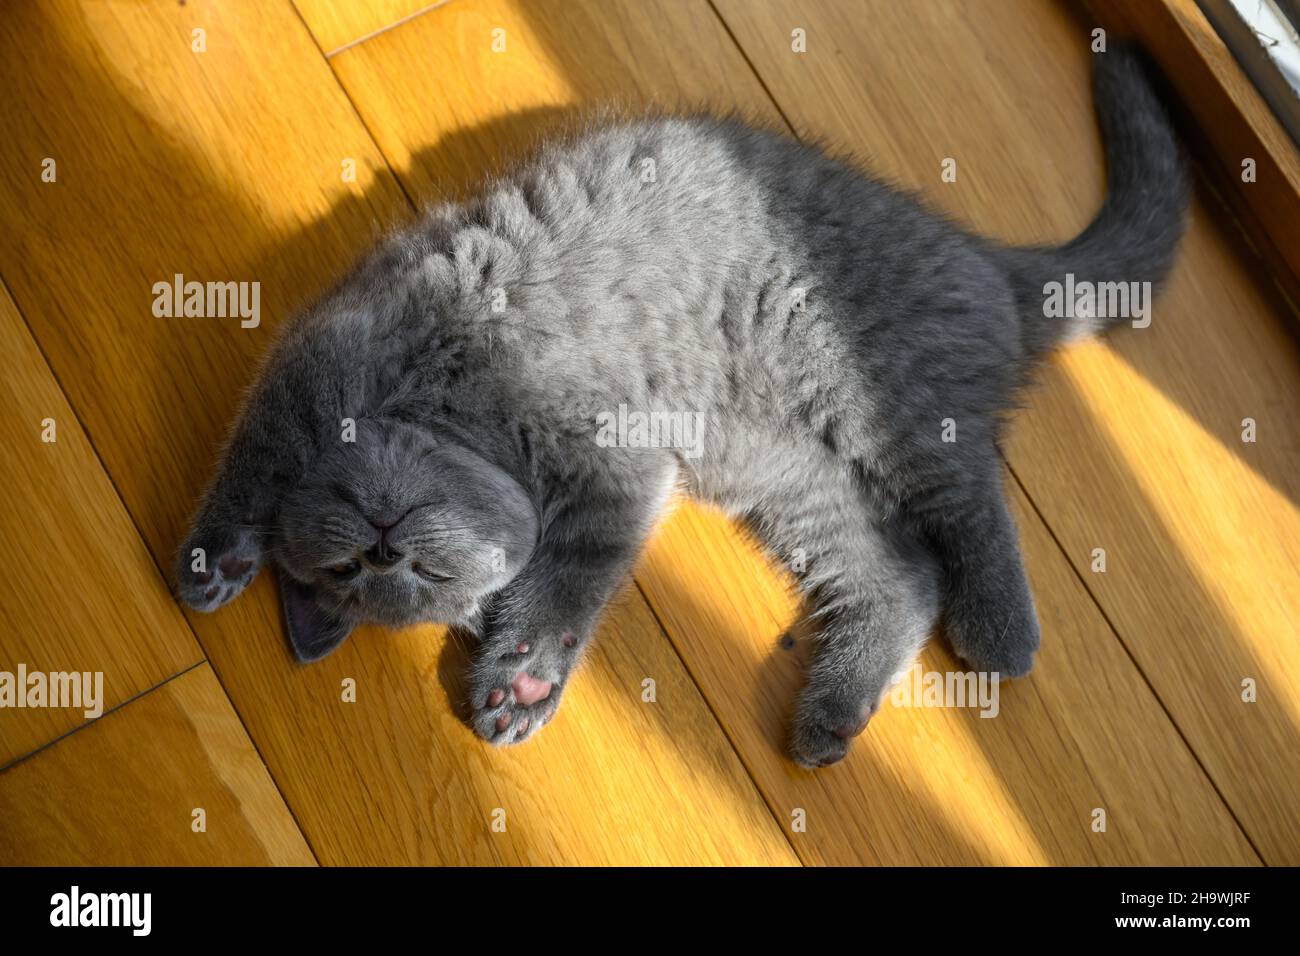 The kitten sleeps in the supine position with his hands up. Very funny and cute pose, a blue British Shorthair cat lying on a wooden floor in the room Stock Photo